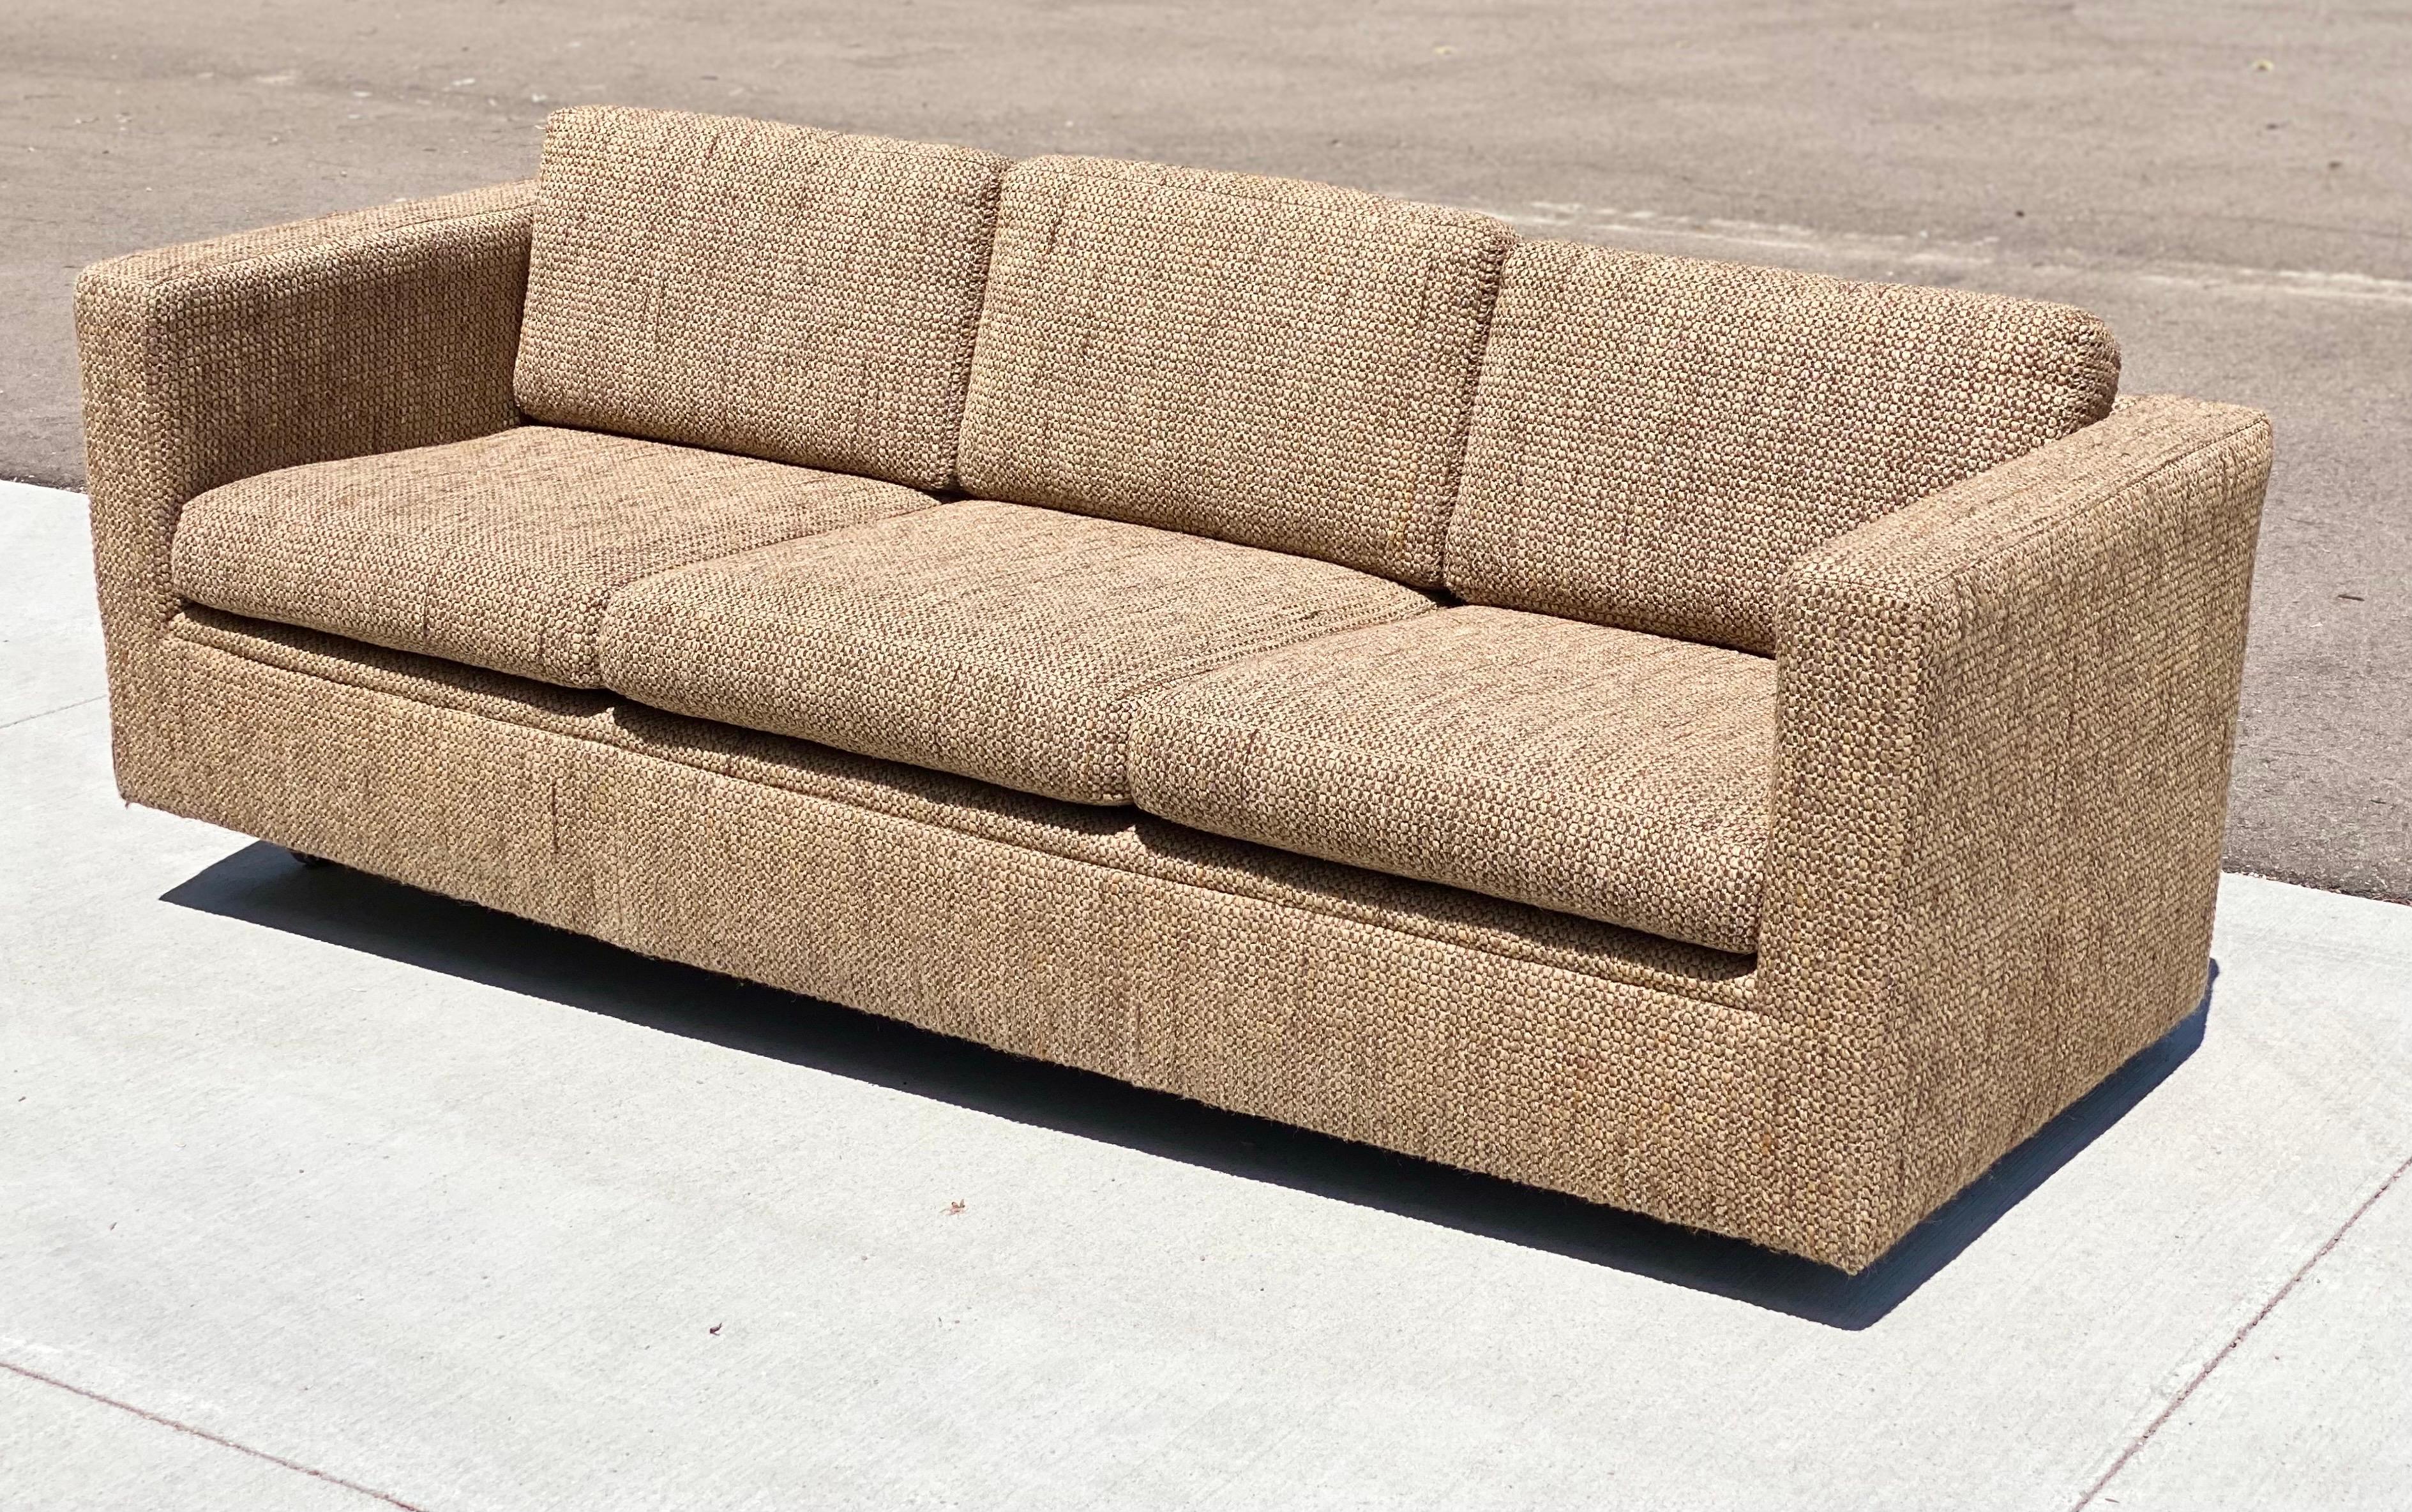 We are very pleased to offer a chic, tuxedo sofa by Milo Baughman for Thayer Coggin, circa the 1980s. This sofa showcases a wraparound frame and loose cushions upholstered in a wool brown fabric. The sofa sits on four short legs. Marked on the